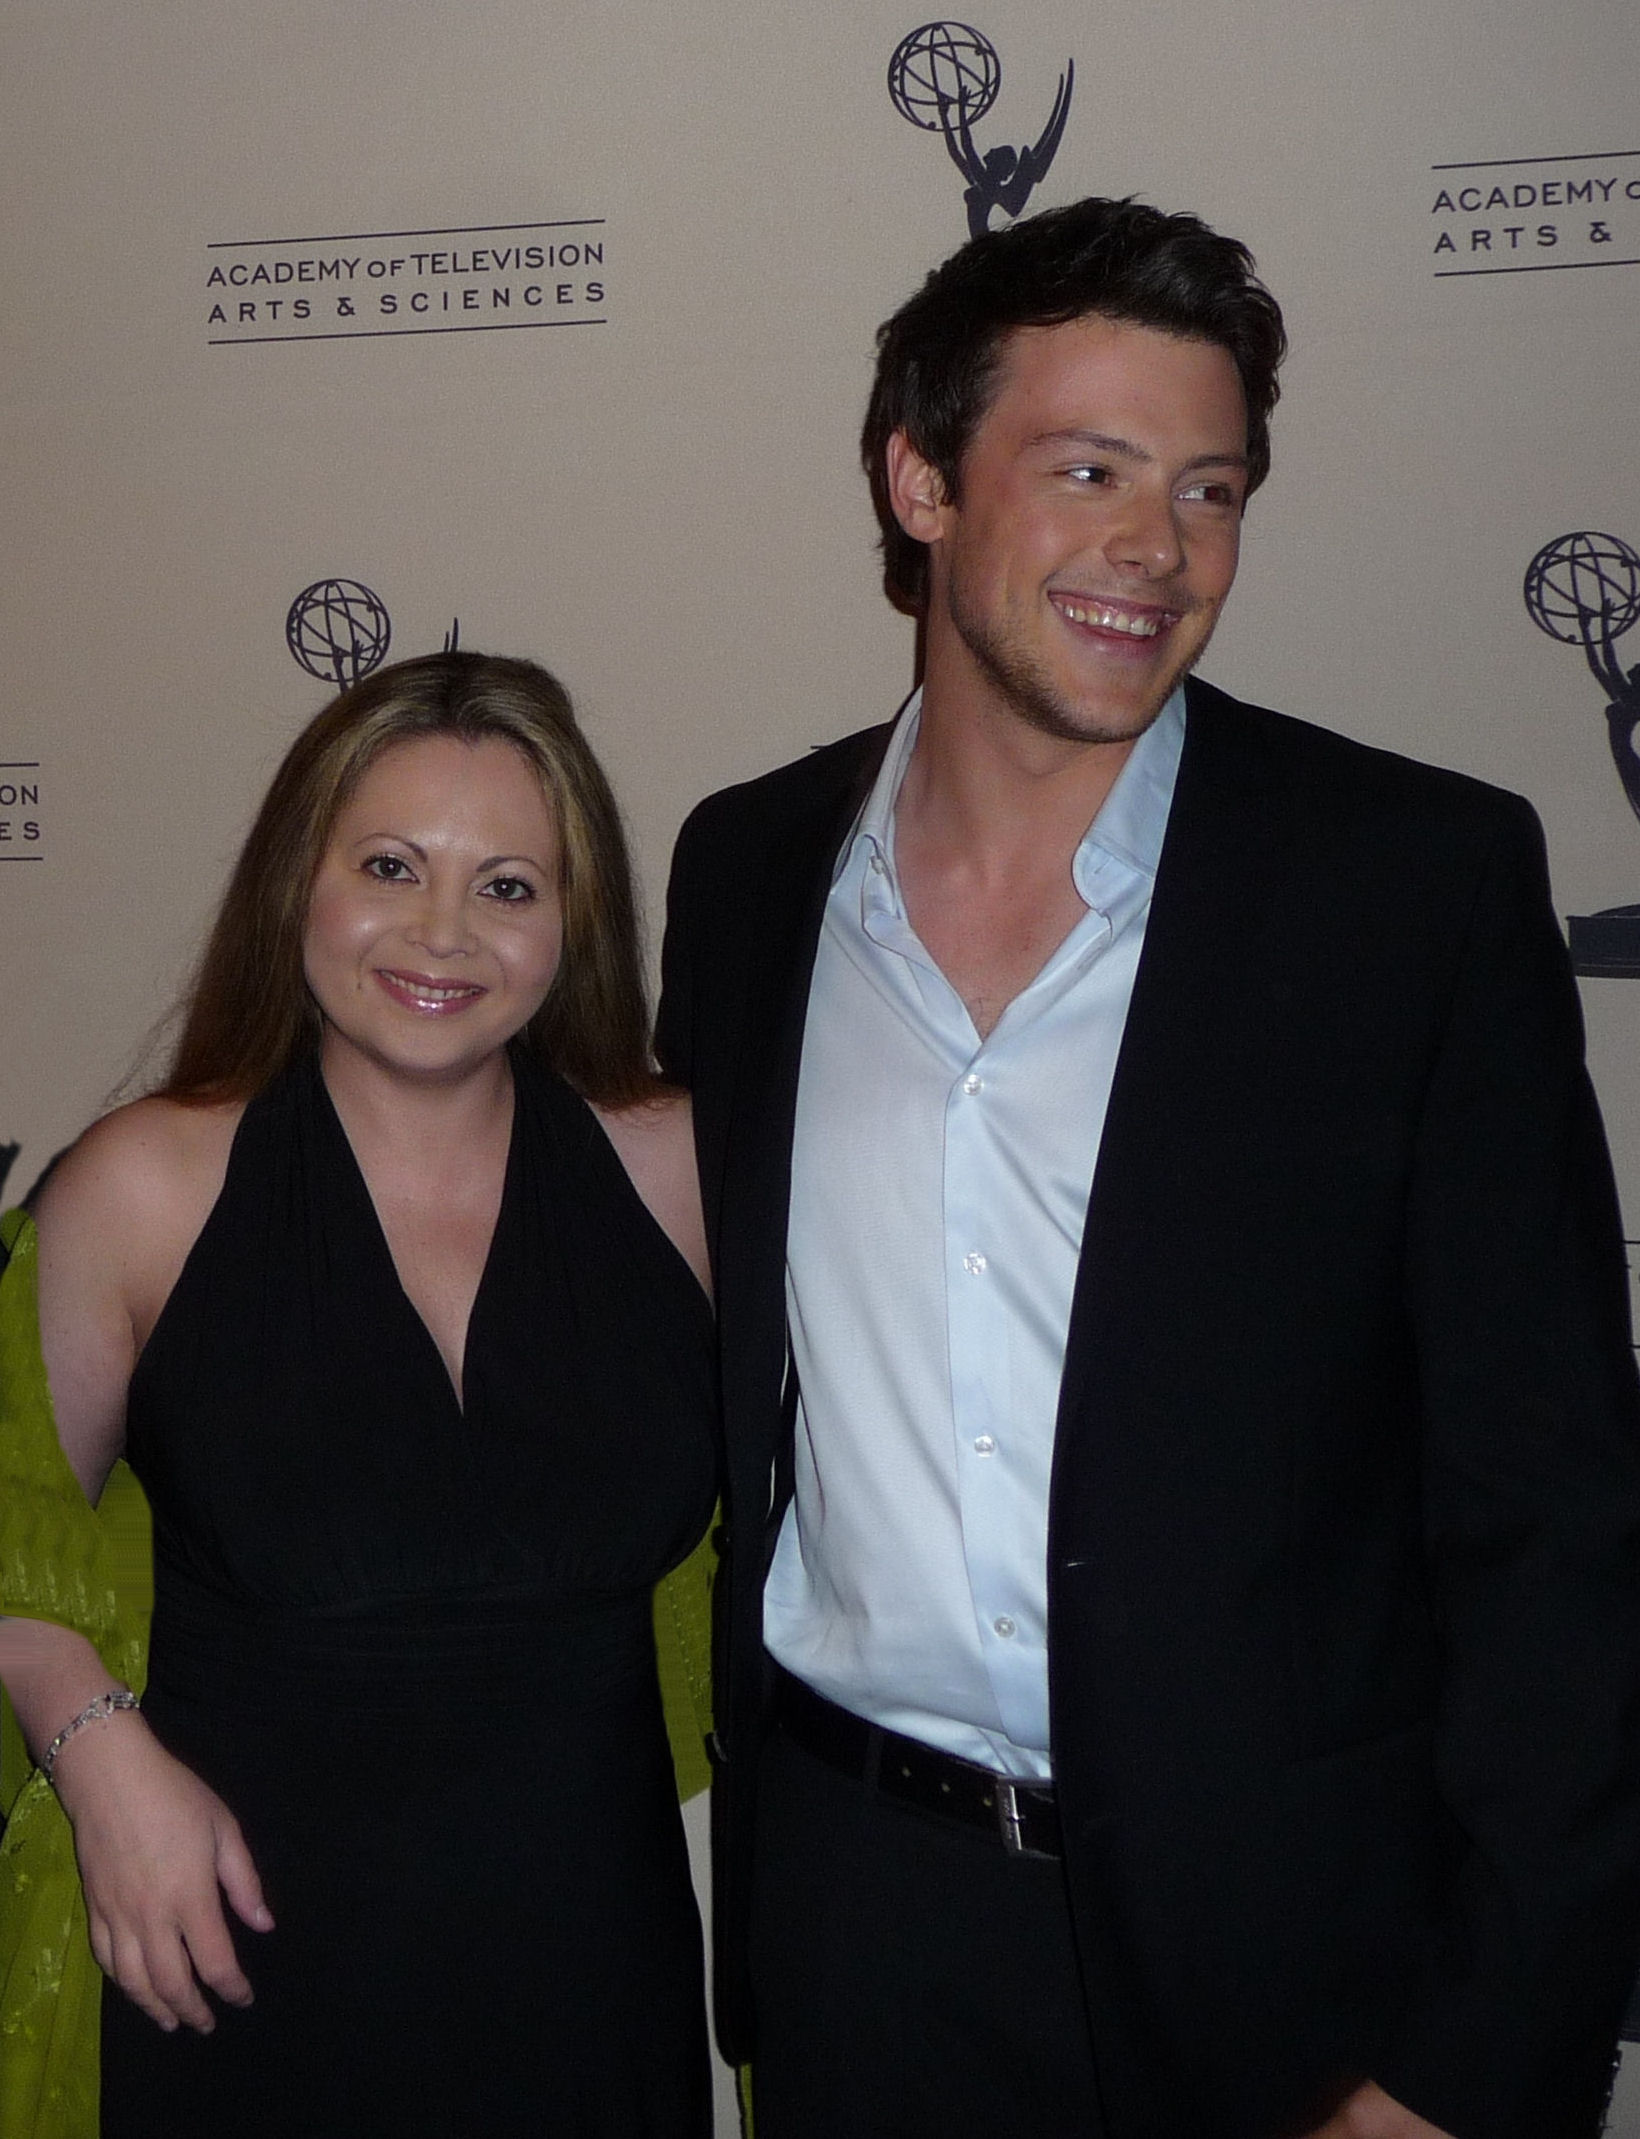 Producer/Director Julia Davis with Cory Monteith of 